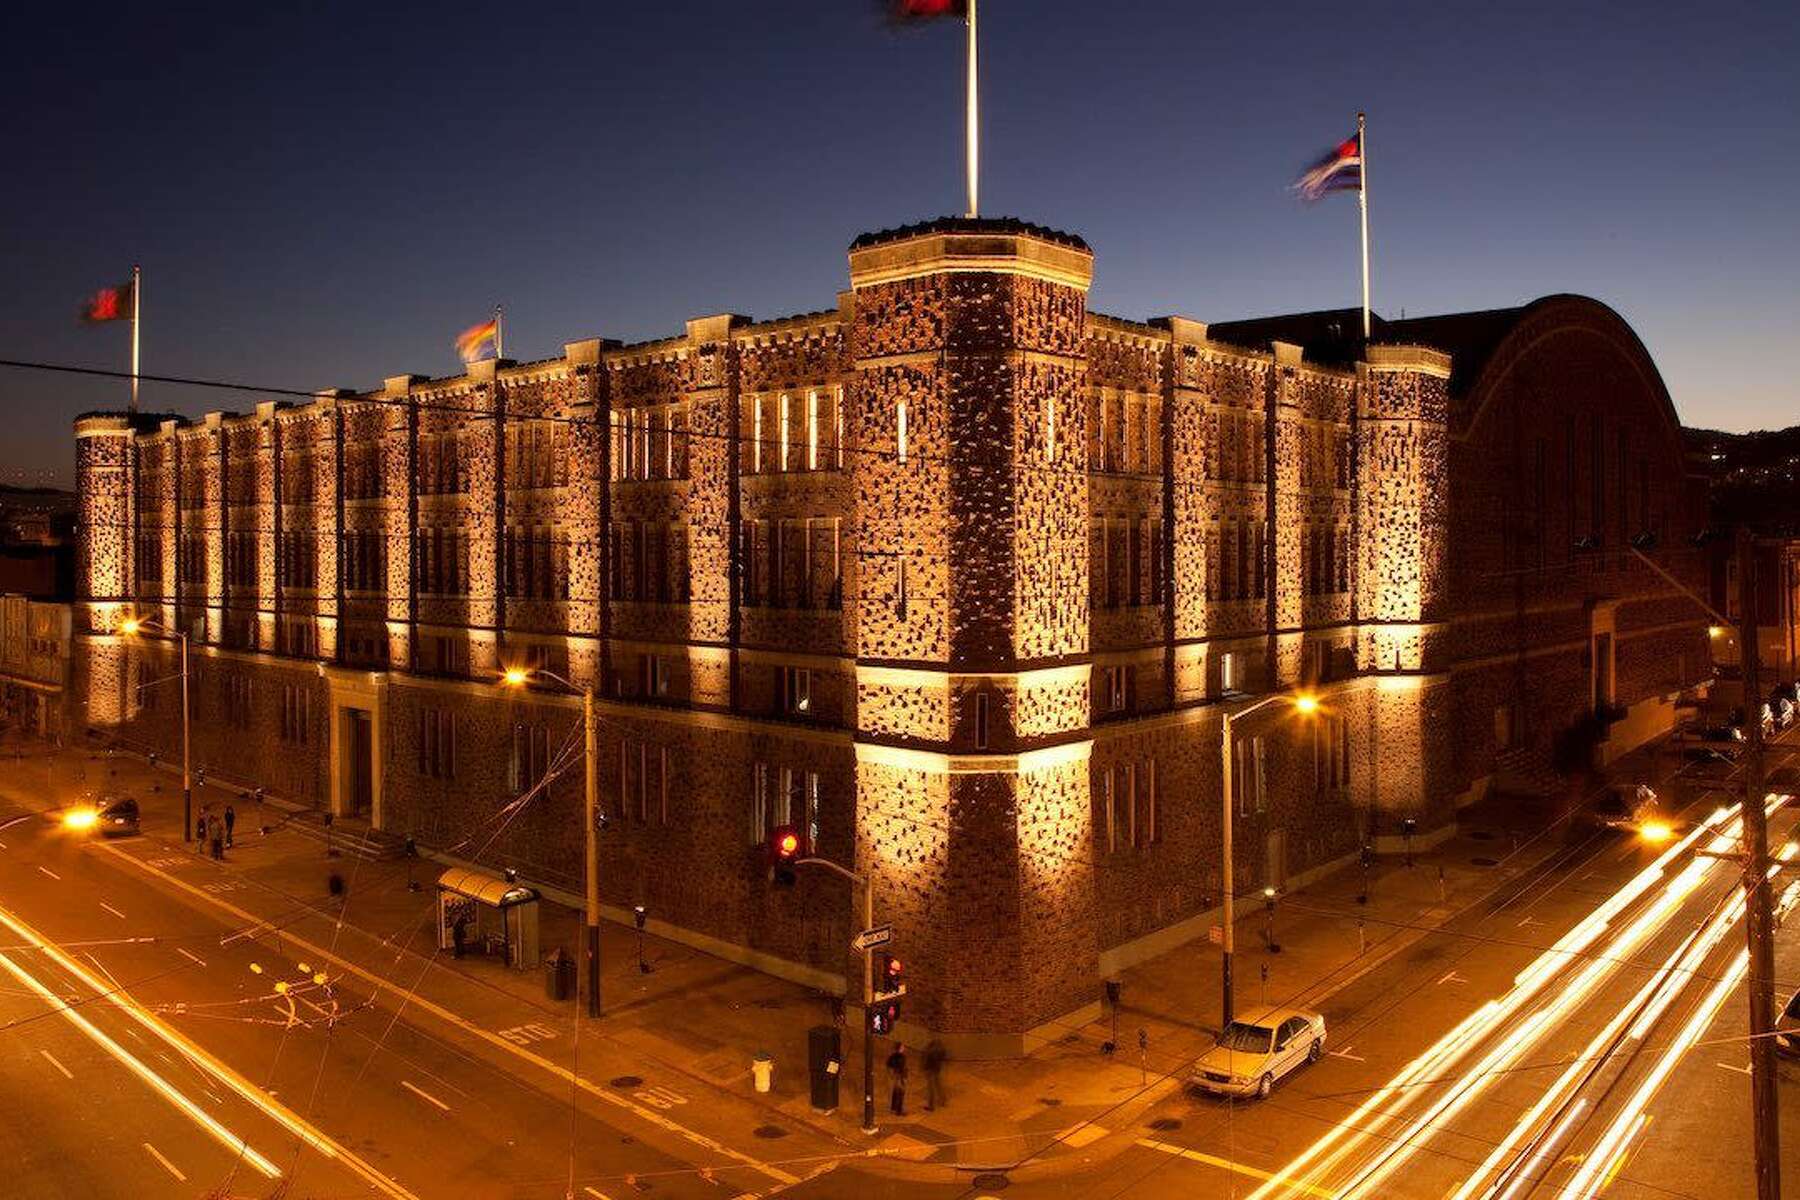 The secrets tucked away in the San Francisco Armory, as told by its former  Kink-y tenants